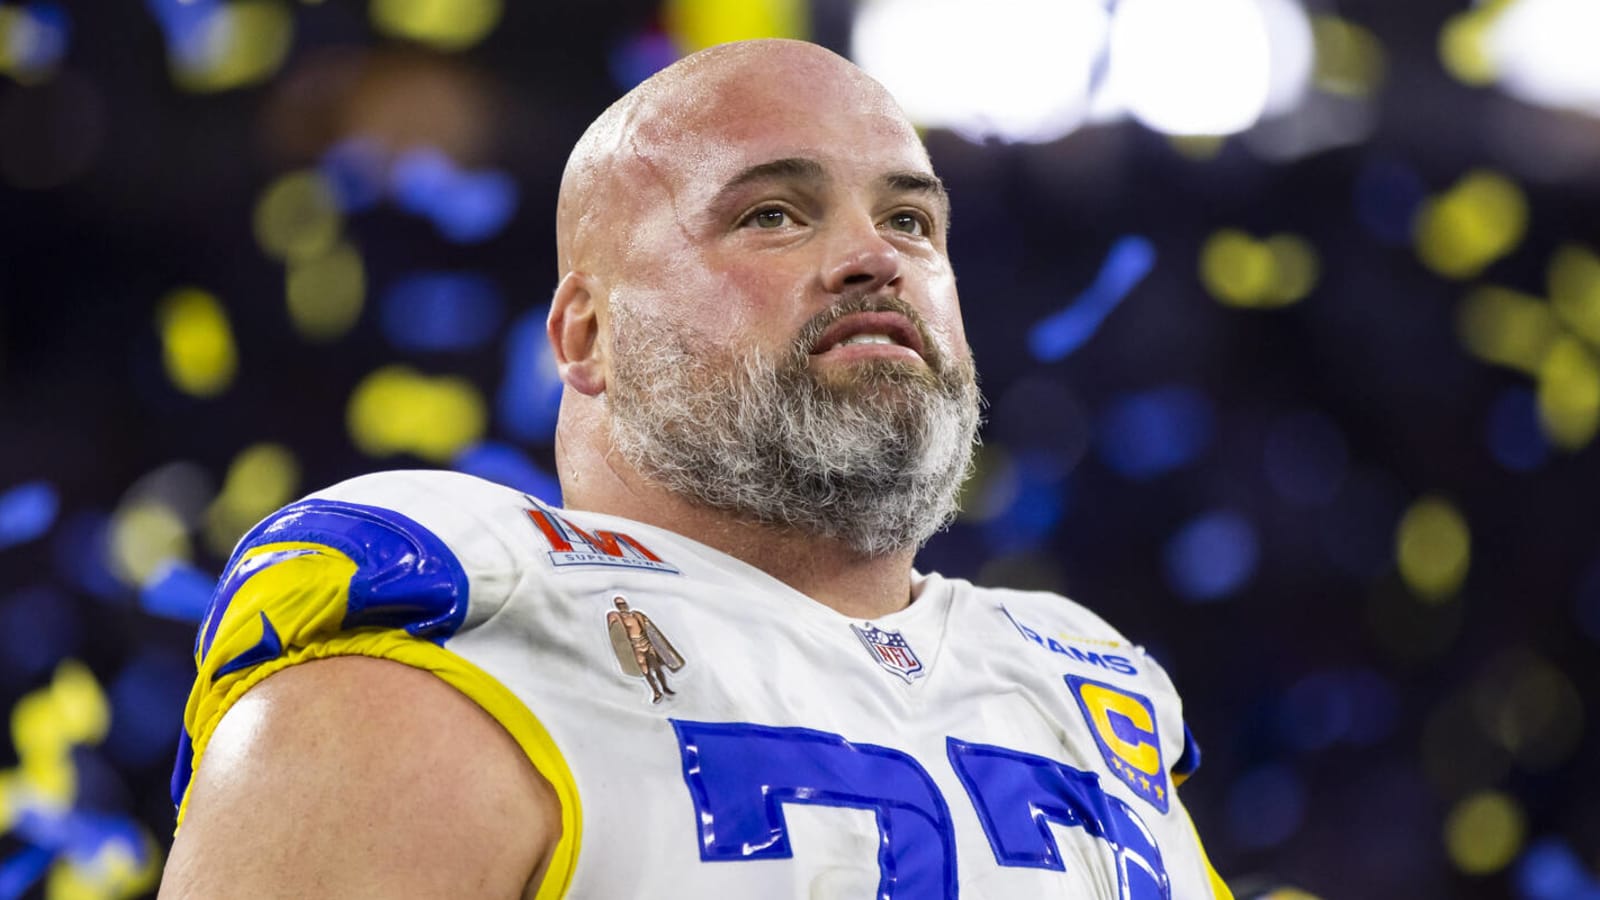 Rams LT Andrew Whitworth retires after 16 seasons